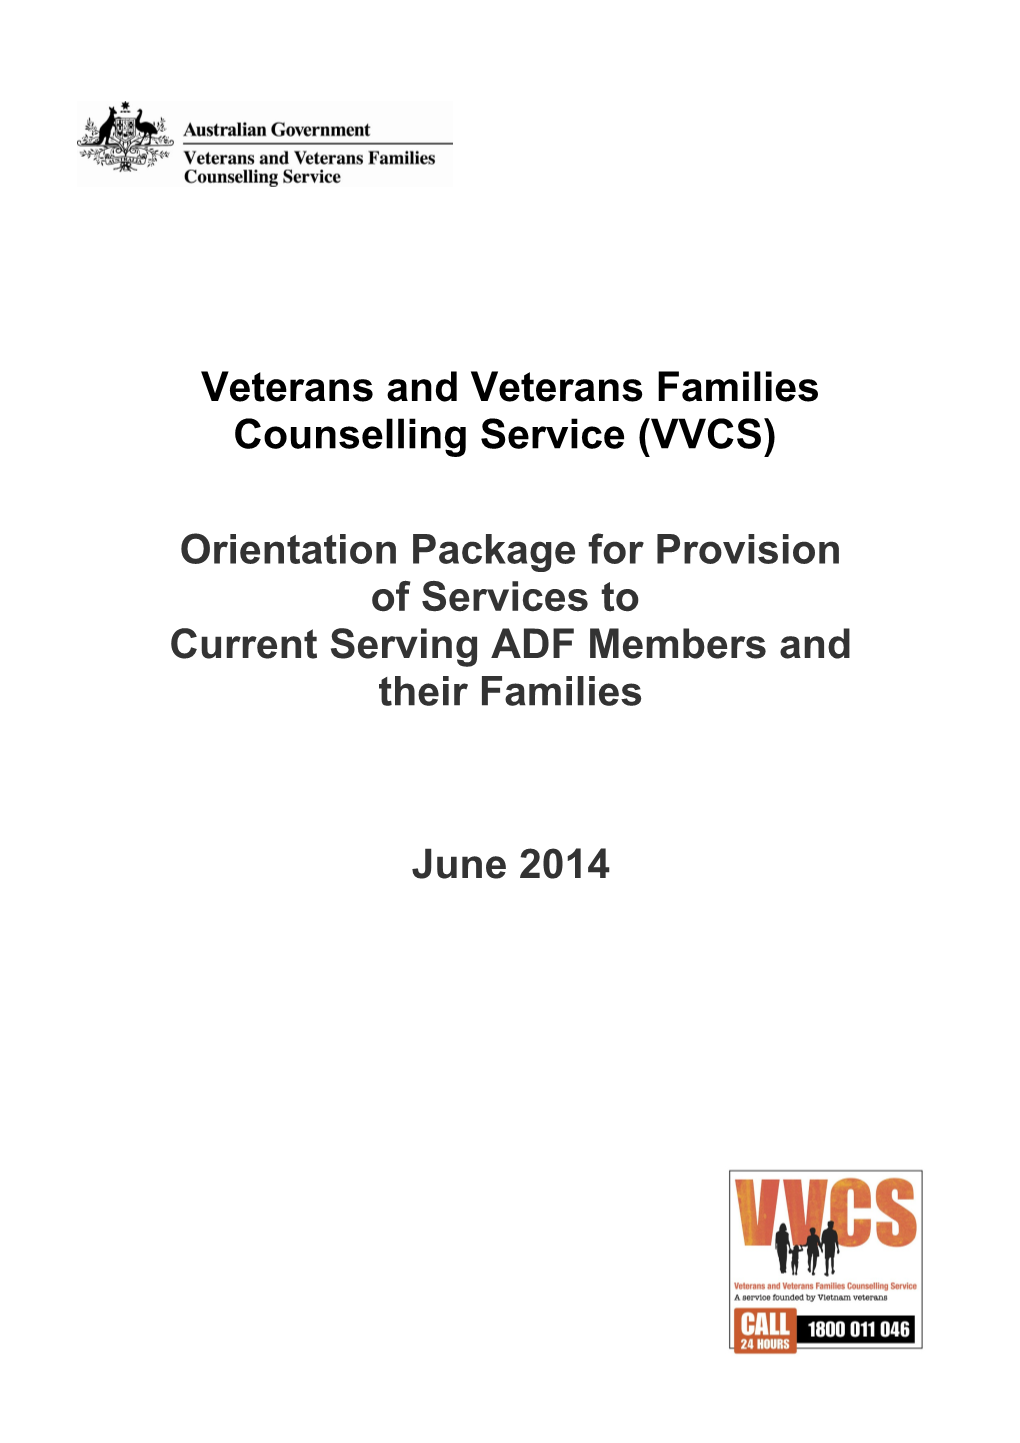 VVCS Orientation Package for Provision of Services to Current Serving Members and Their Families